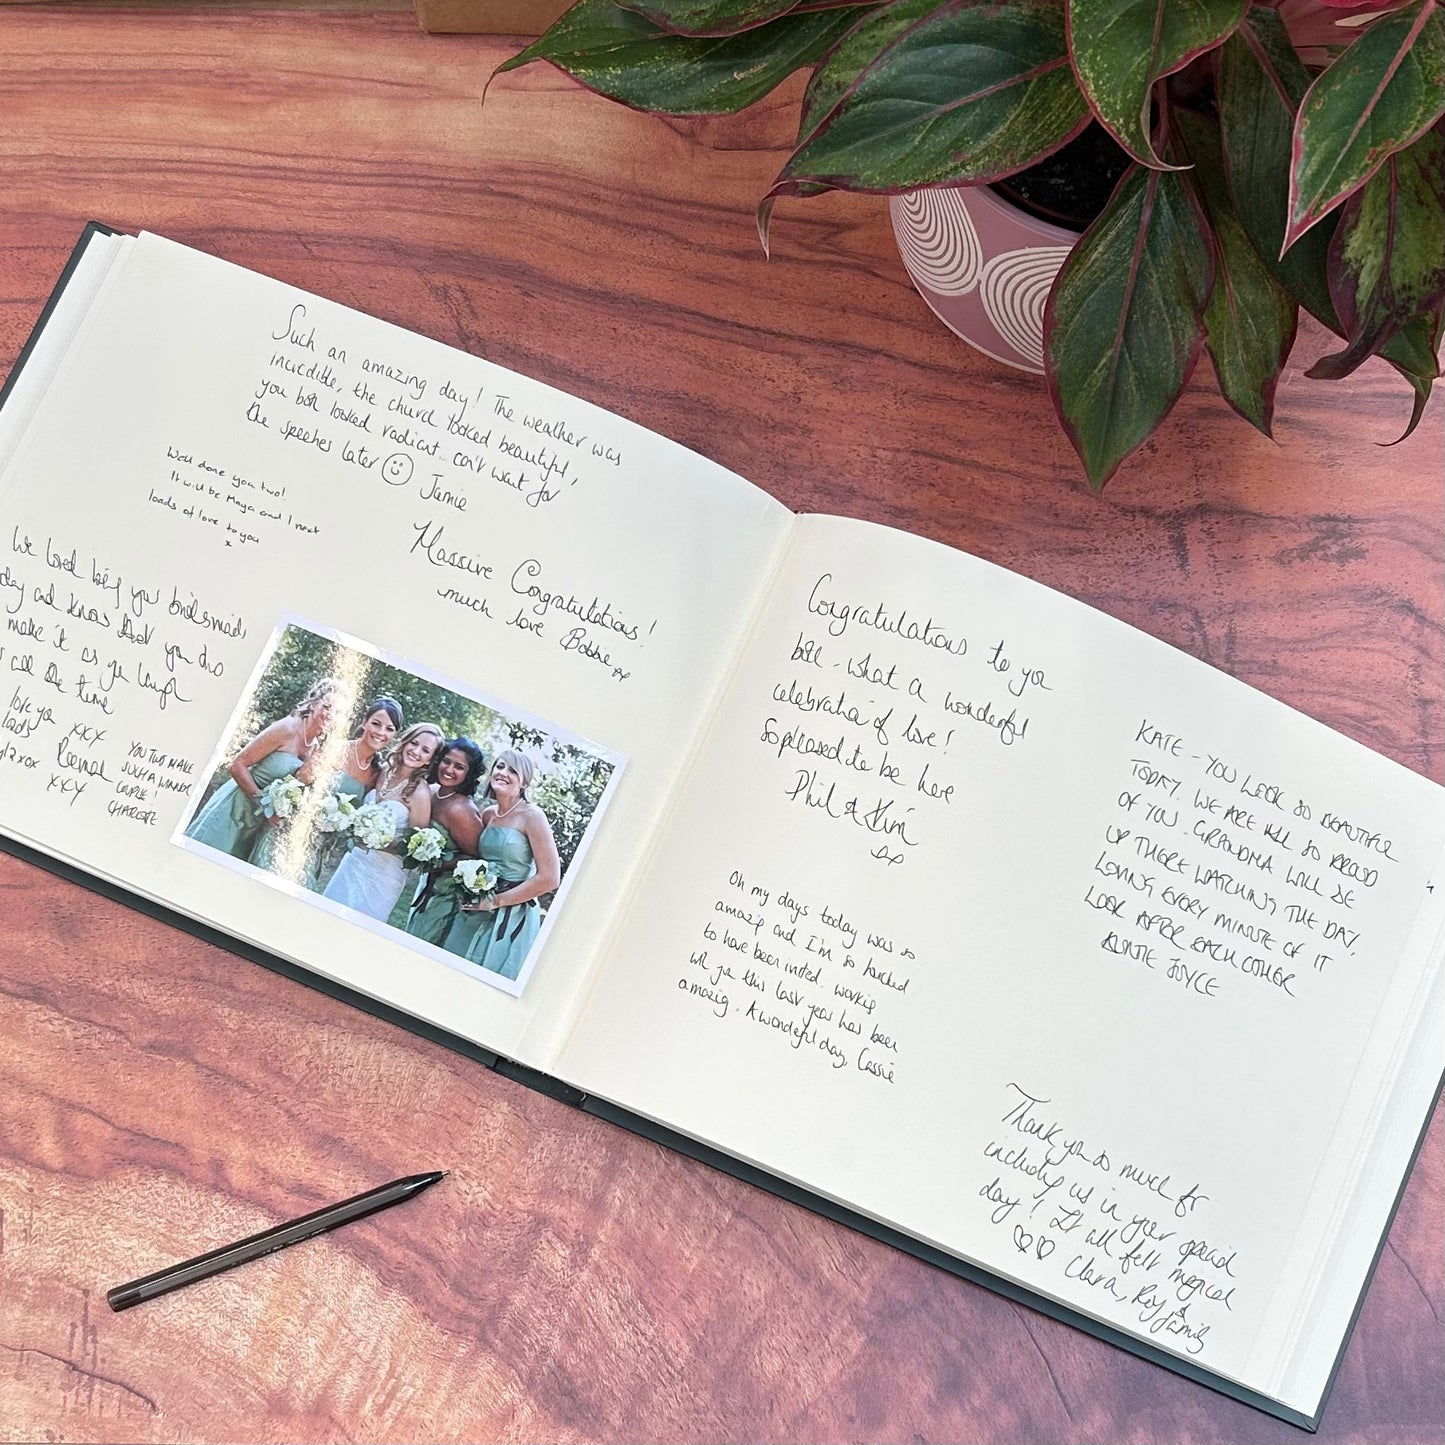 an open wedding guest book is on a wooden table. the wedding guest book has been signed by lots of guests with messages. there is also a wedding photo in the guest book